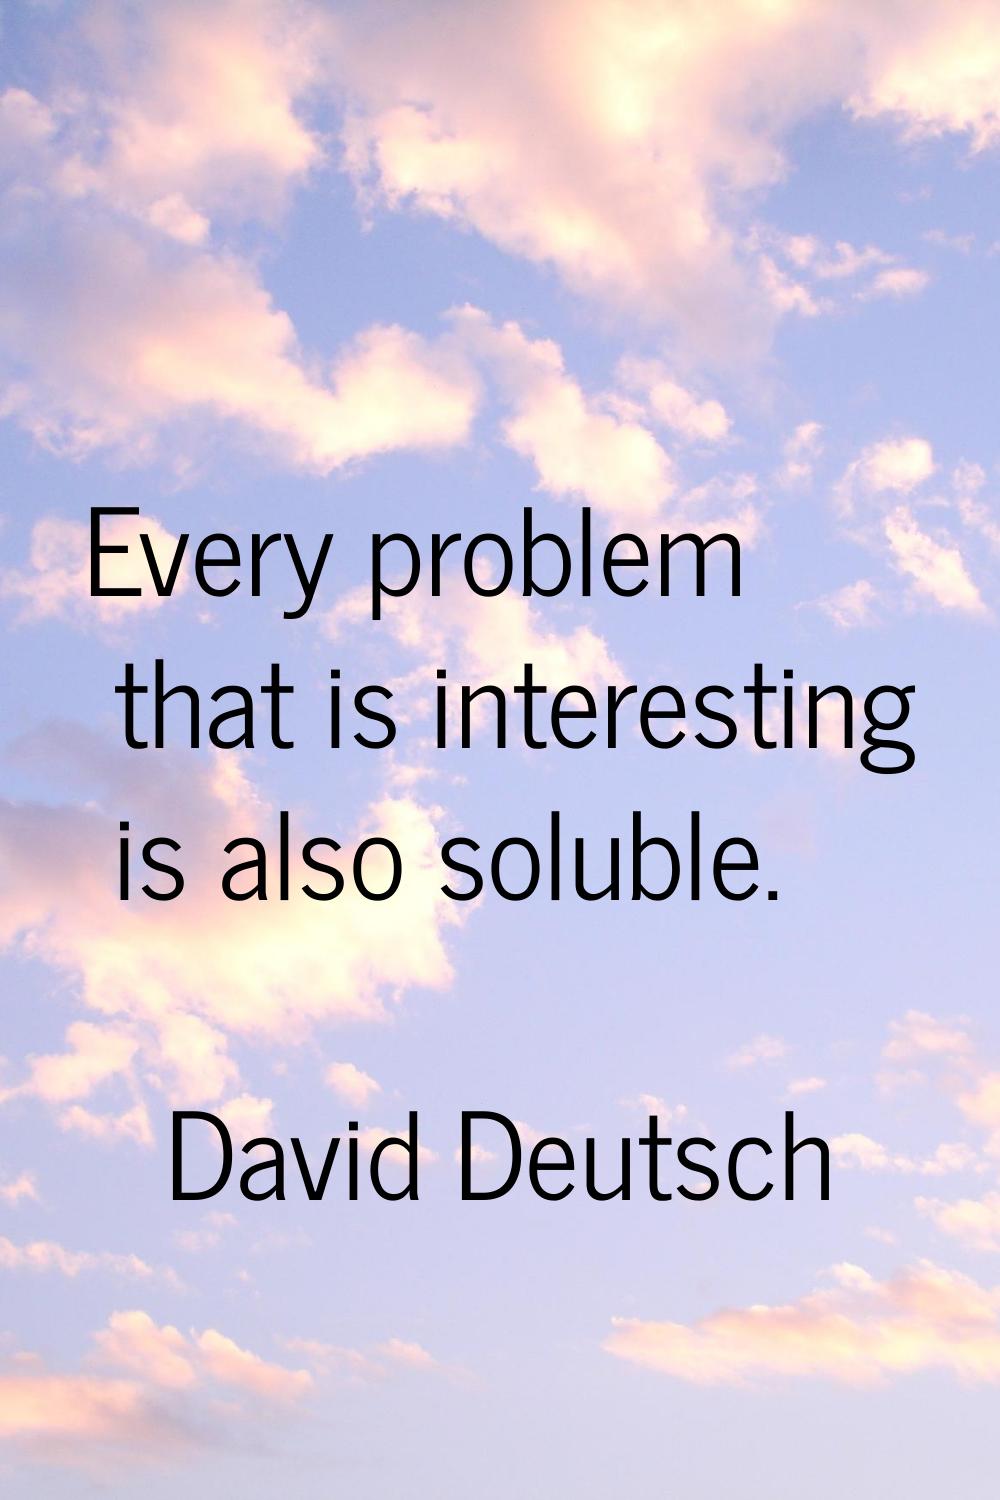 Every problem that is interesting is also soluble.